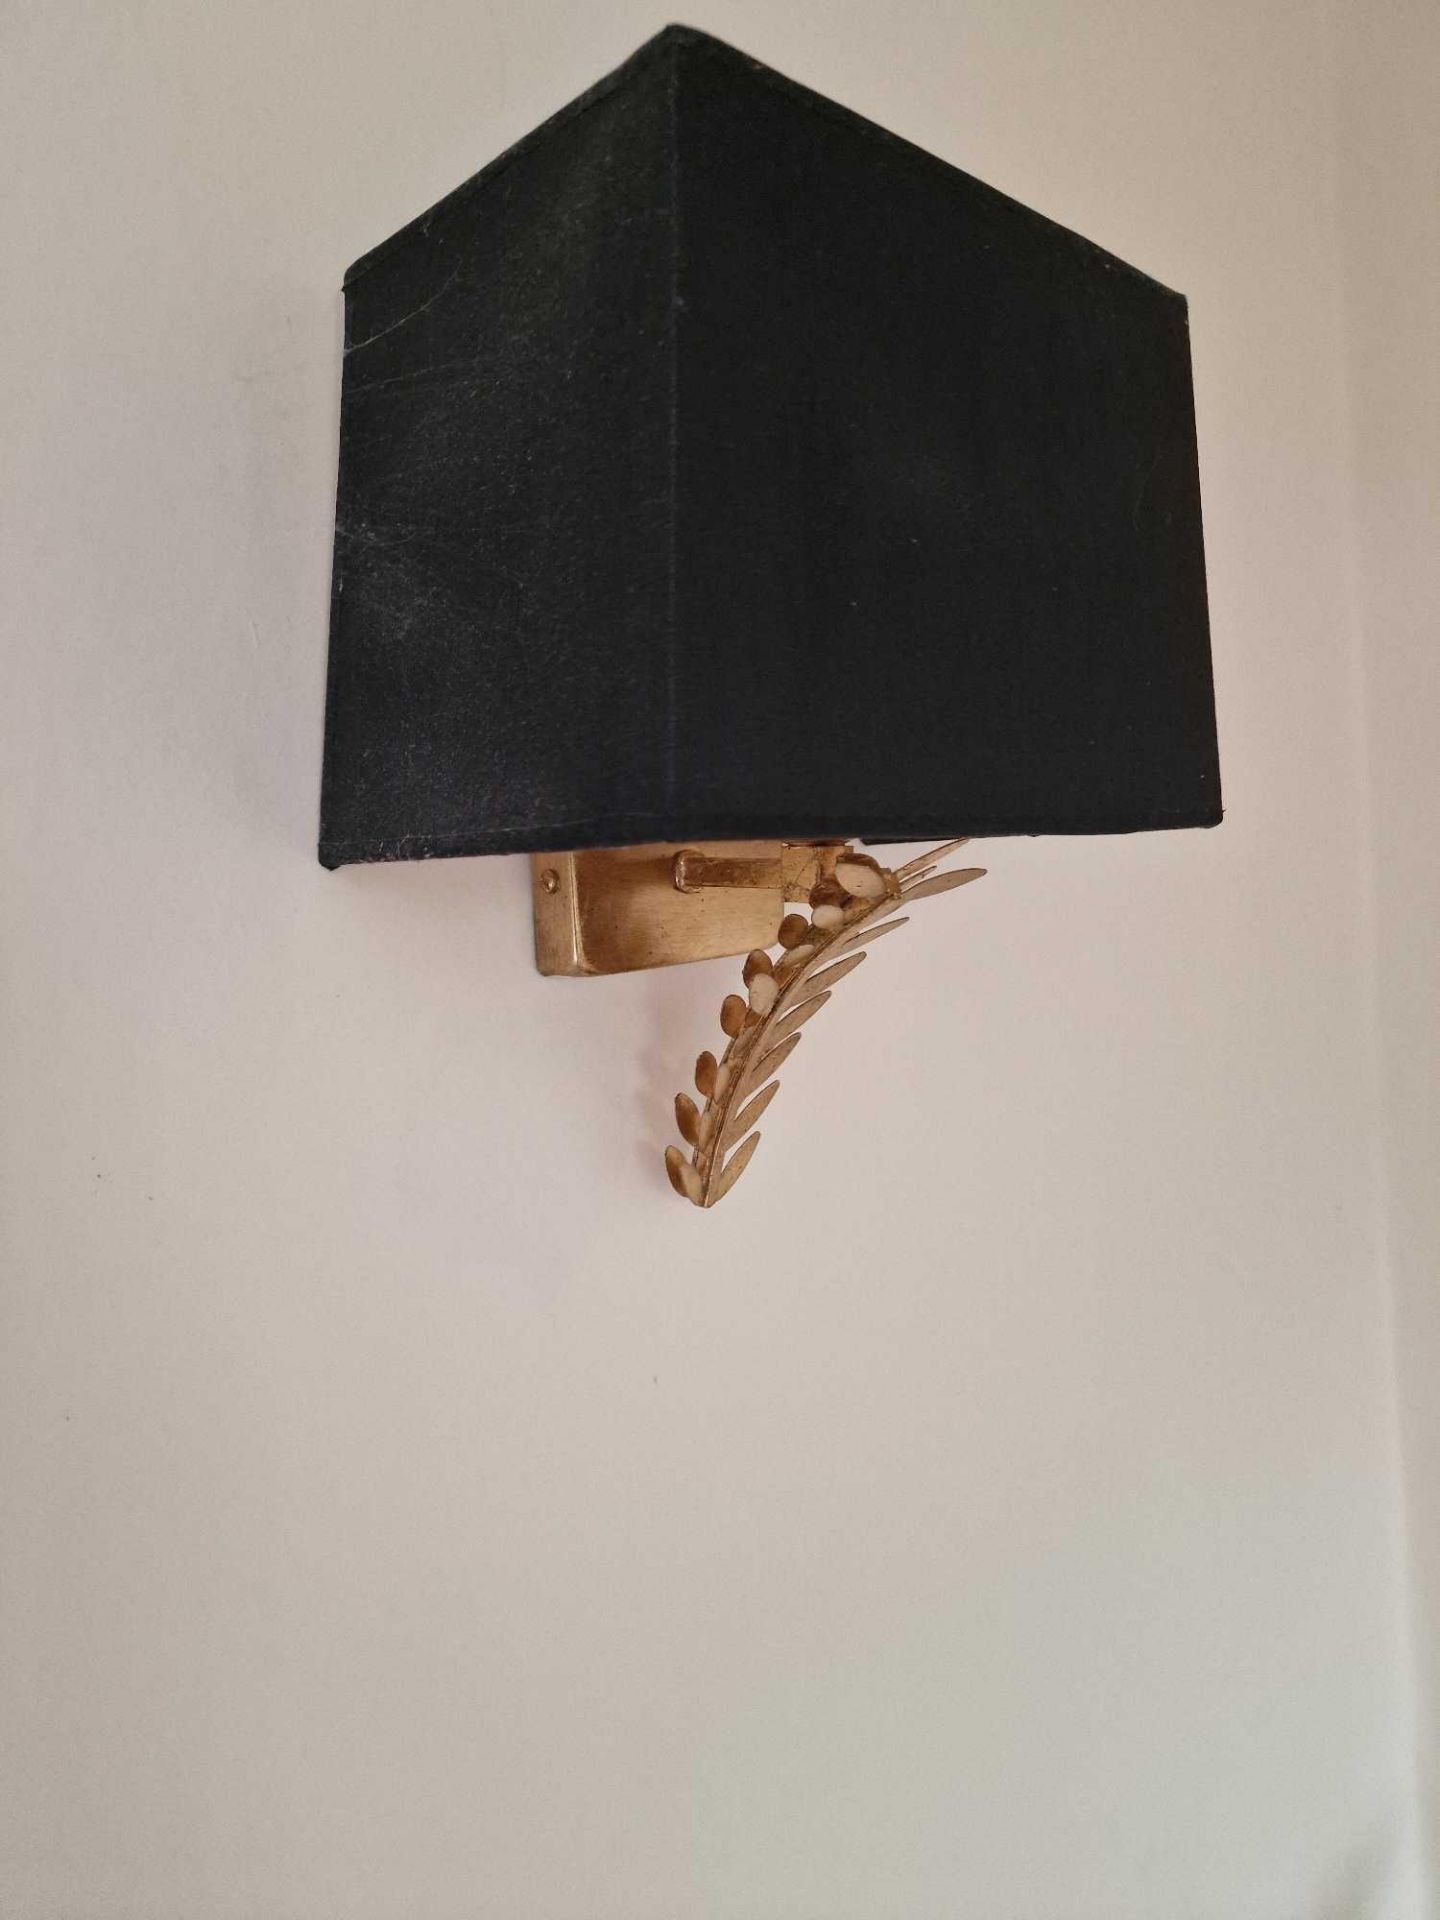 A Polished Brass Single Arm Wall Sconce With Leaf Decoration Complete With Black Box Shade 27cm